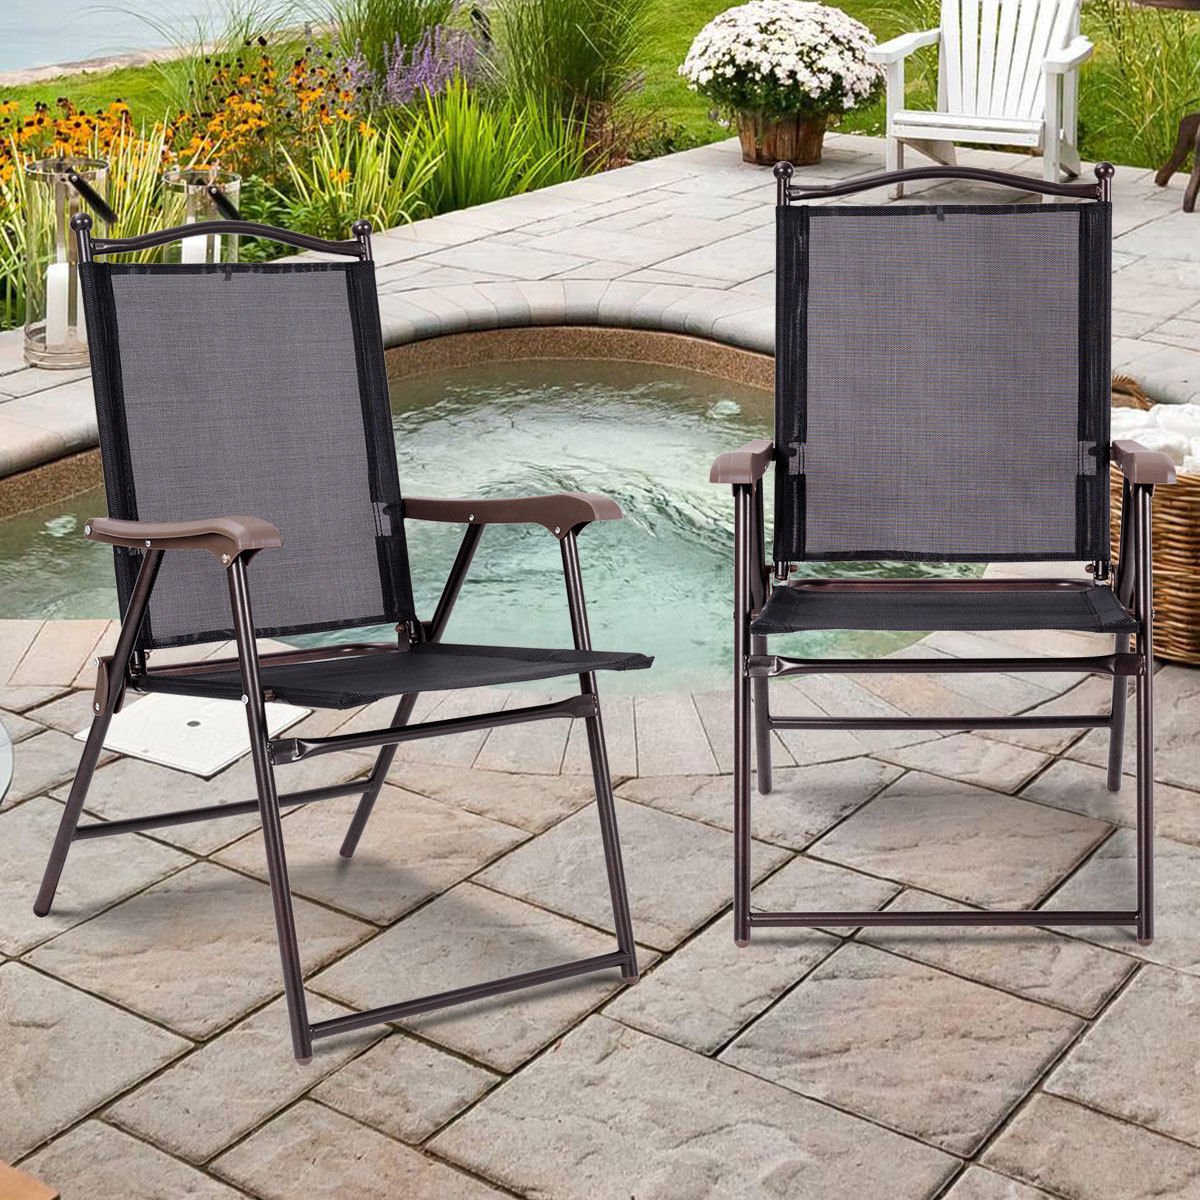 Set Of 2 Folding Patio Furniture Sling Back Chairs Outdoors Black